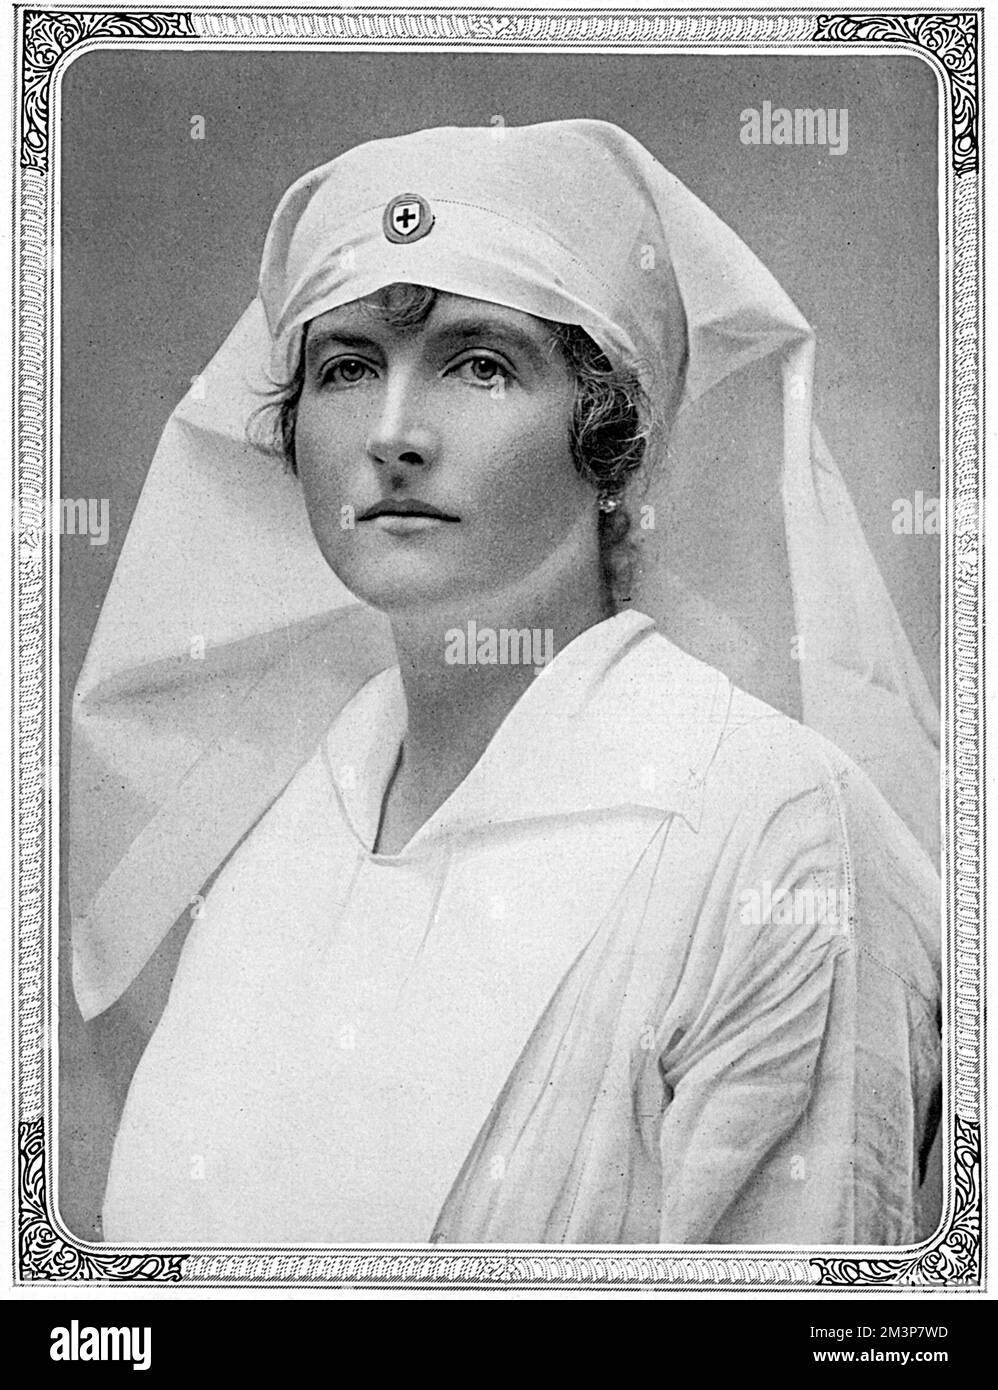 Lady Swettenham, formerly Mary Emily Copeland, wife of the famous colonial administrator, Sir Alexander Sweettenhan, K.C.M.G, pictured in nursing uniform during the First World War when she was an ambulance worker out at the front in France.     Date: 1917 Stock Photo